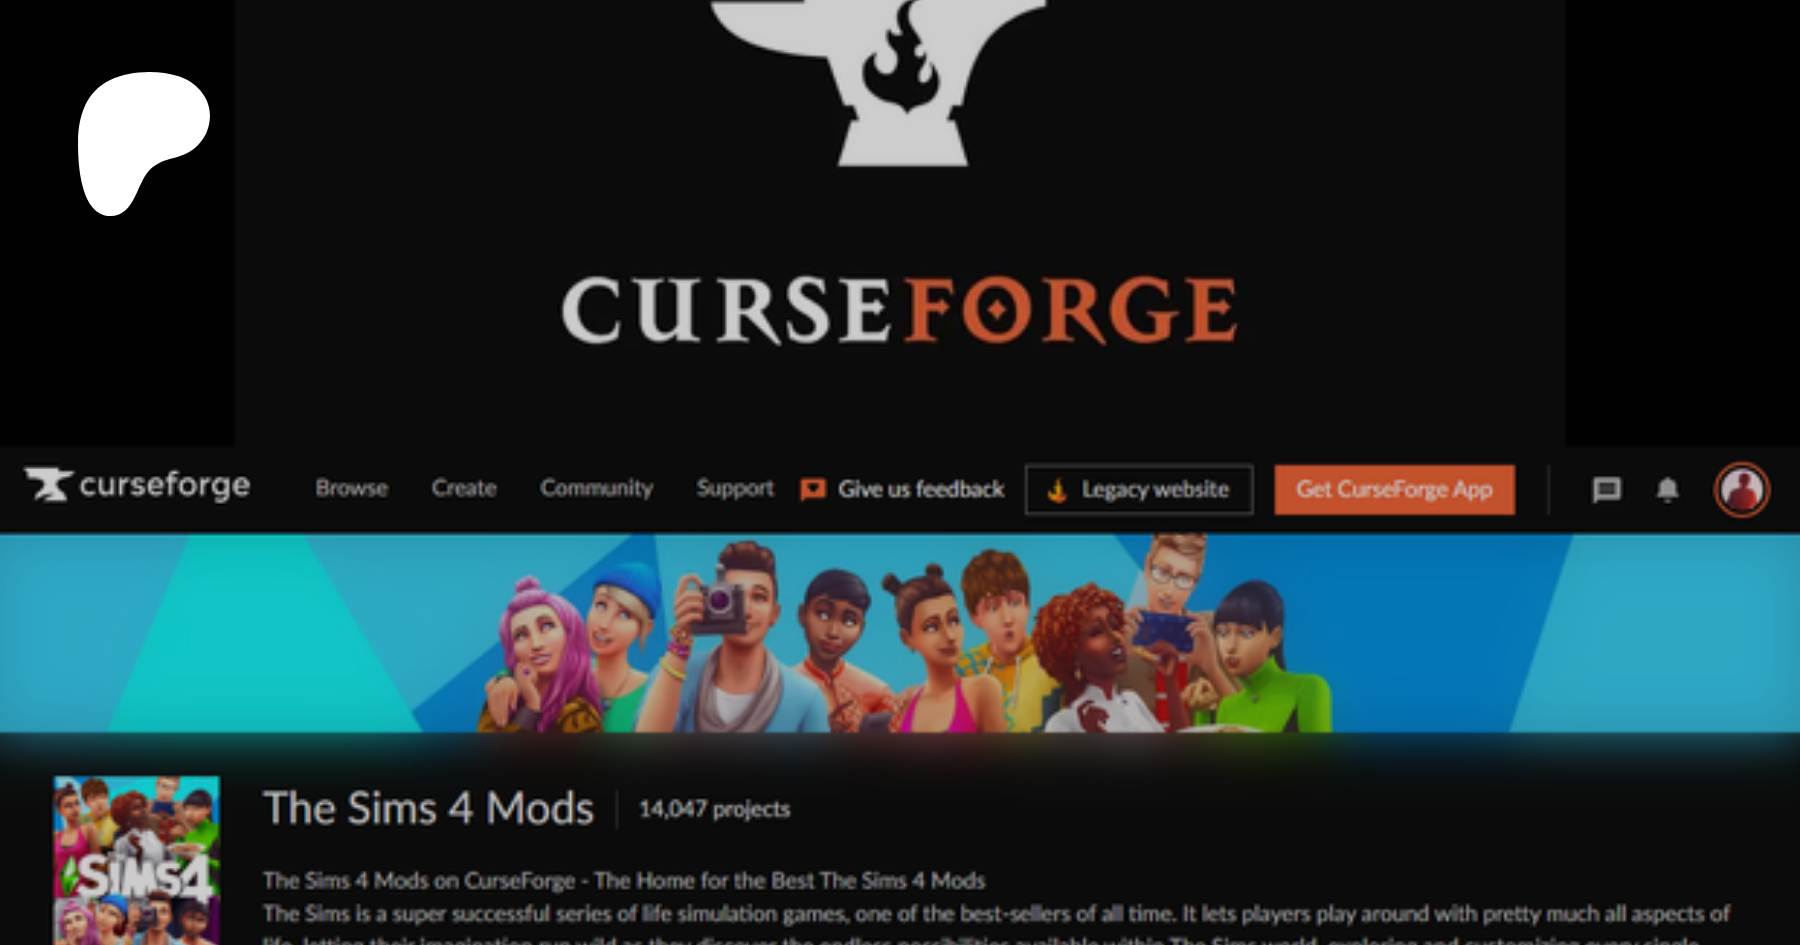 HOW TO INSTALL & DOWNLOAD CC FROM CURSEFORGE